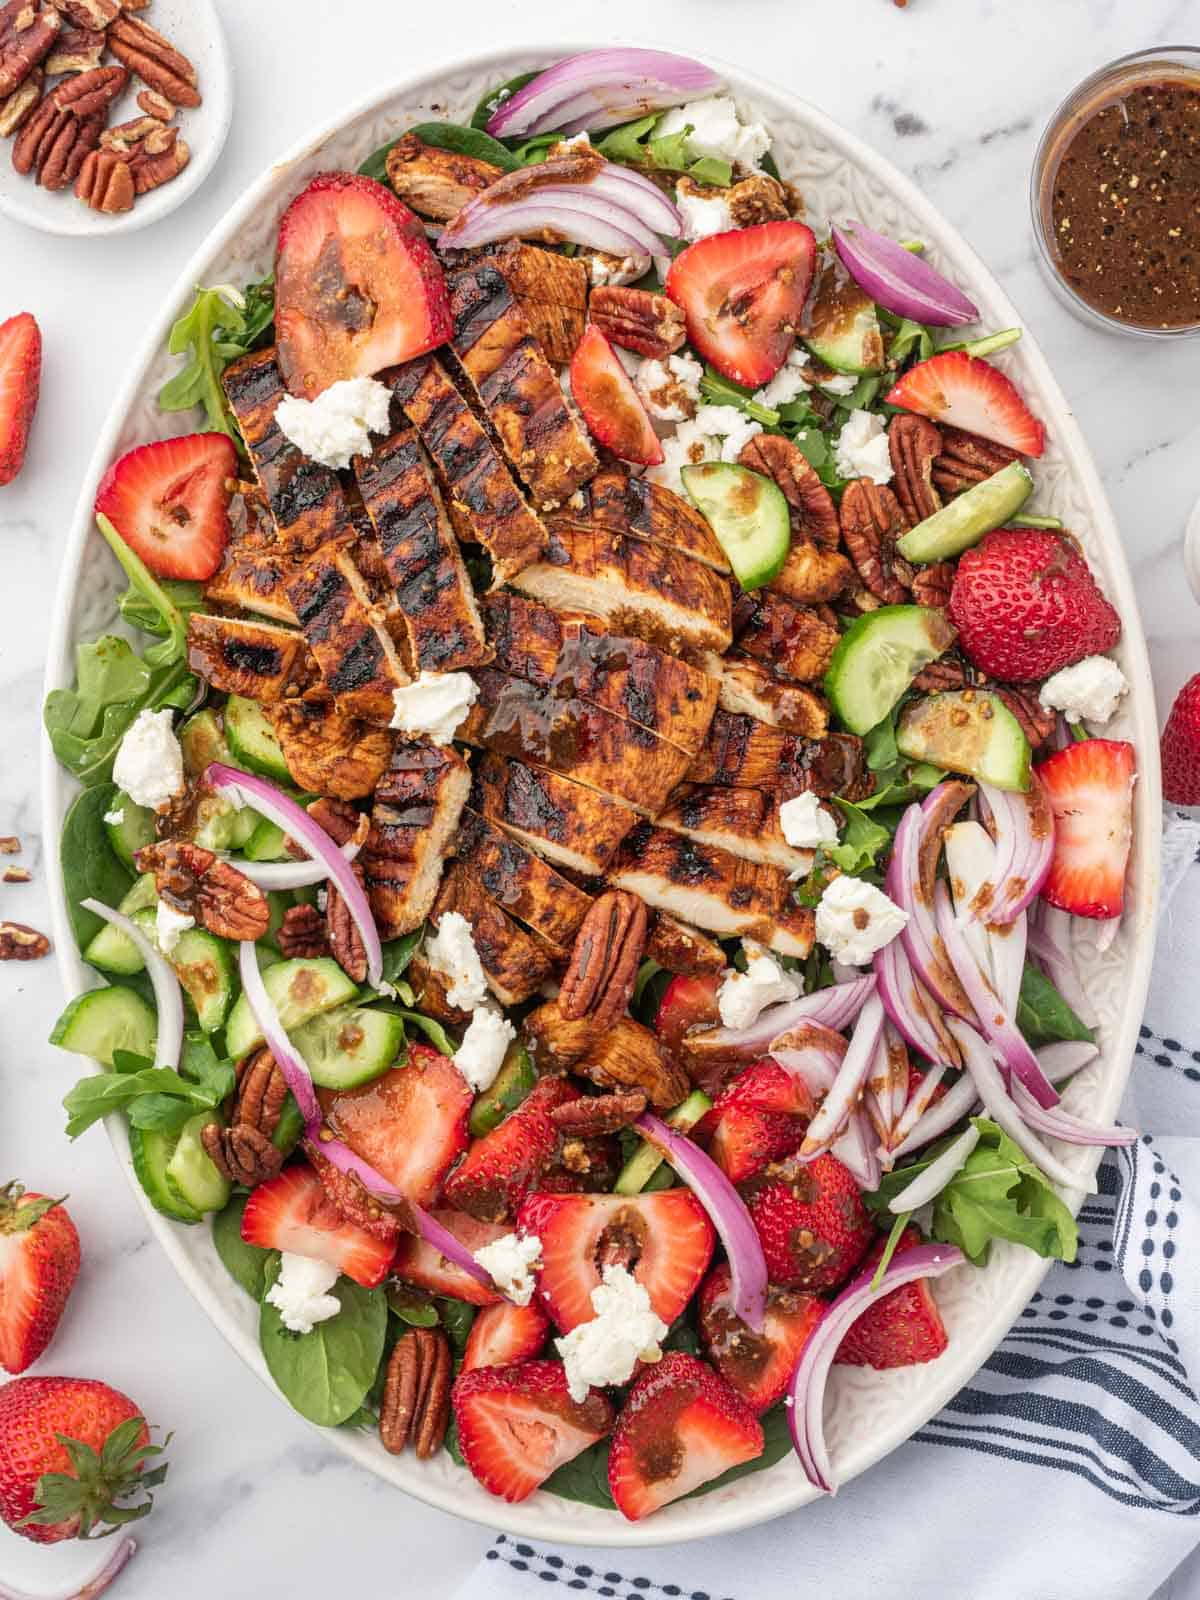 Grilled chicken on spinach salad with fresh strawberries on a serving platter with balsamic dressing and pecans to the side.